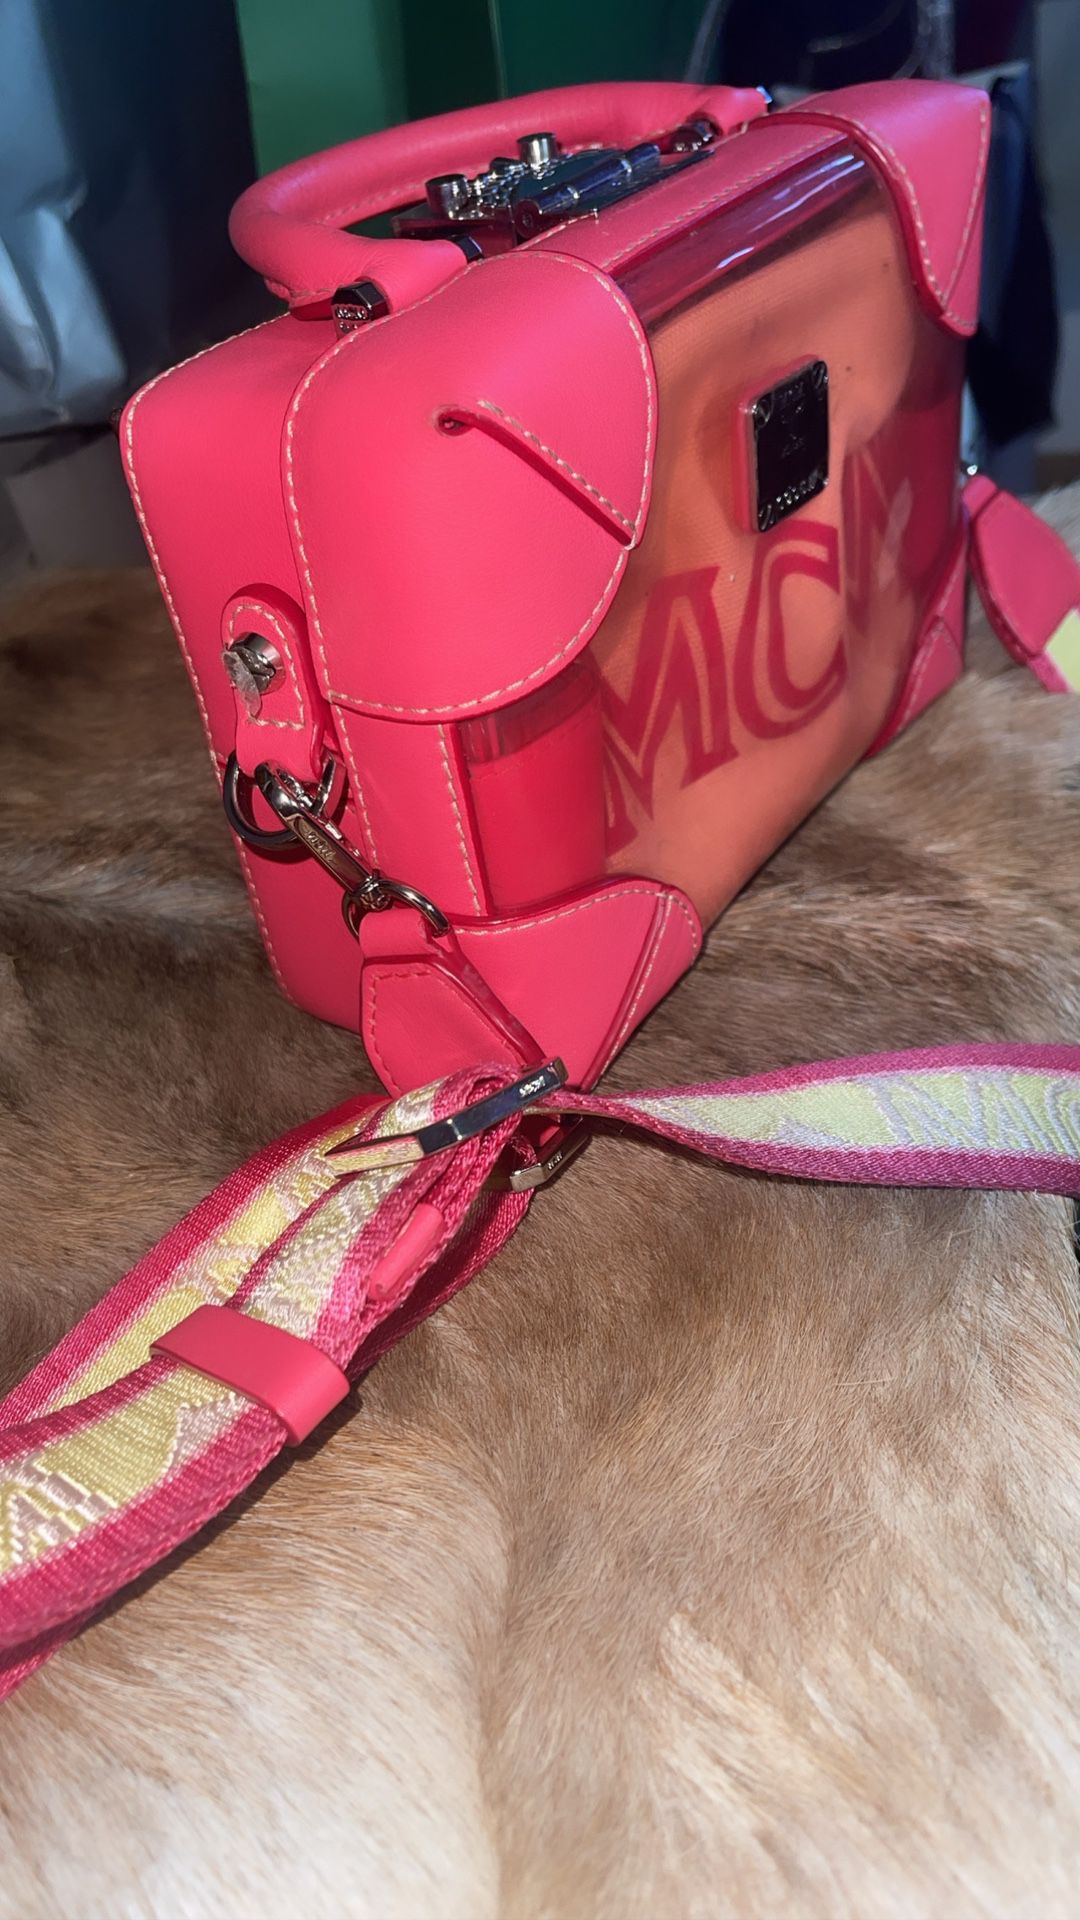 MCM Visteos Pouch Purse Pink Leather Cross Body Bag/Pouch for Sale in North  Providence, RI - OfferUp